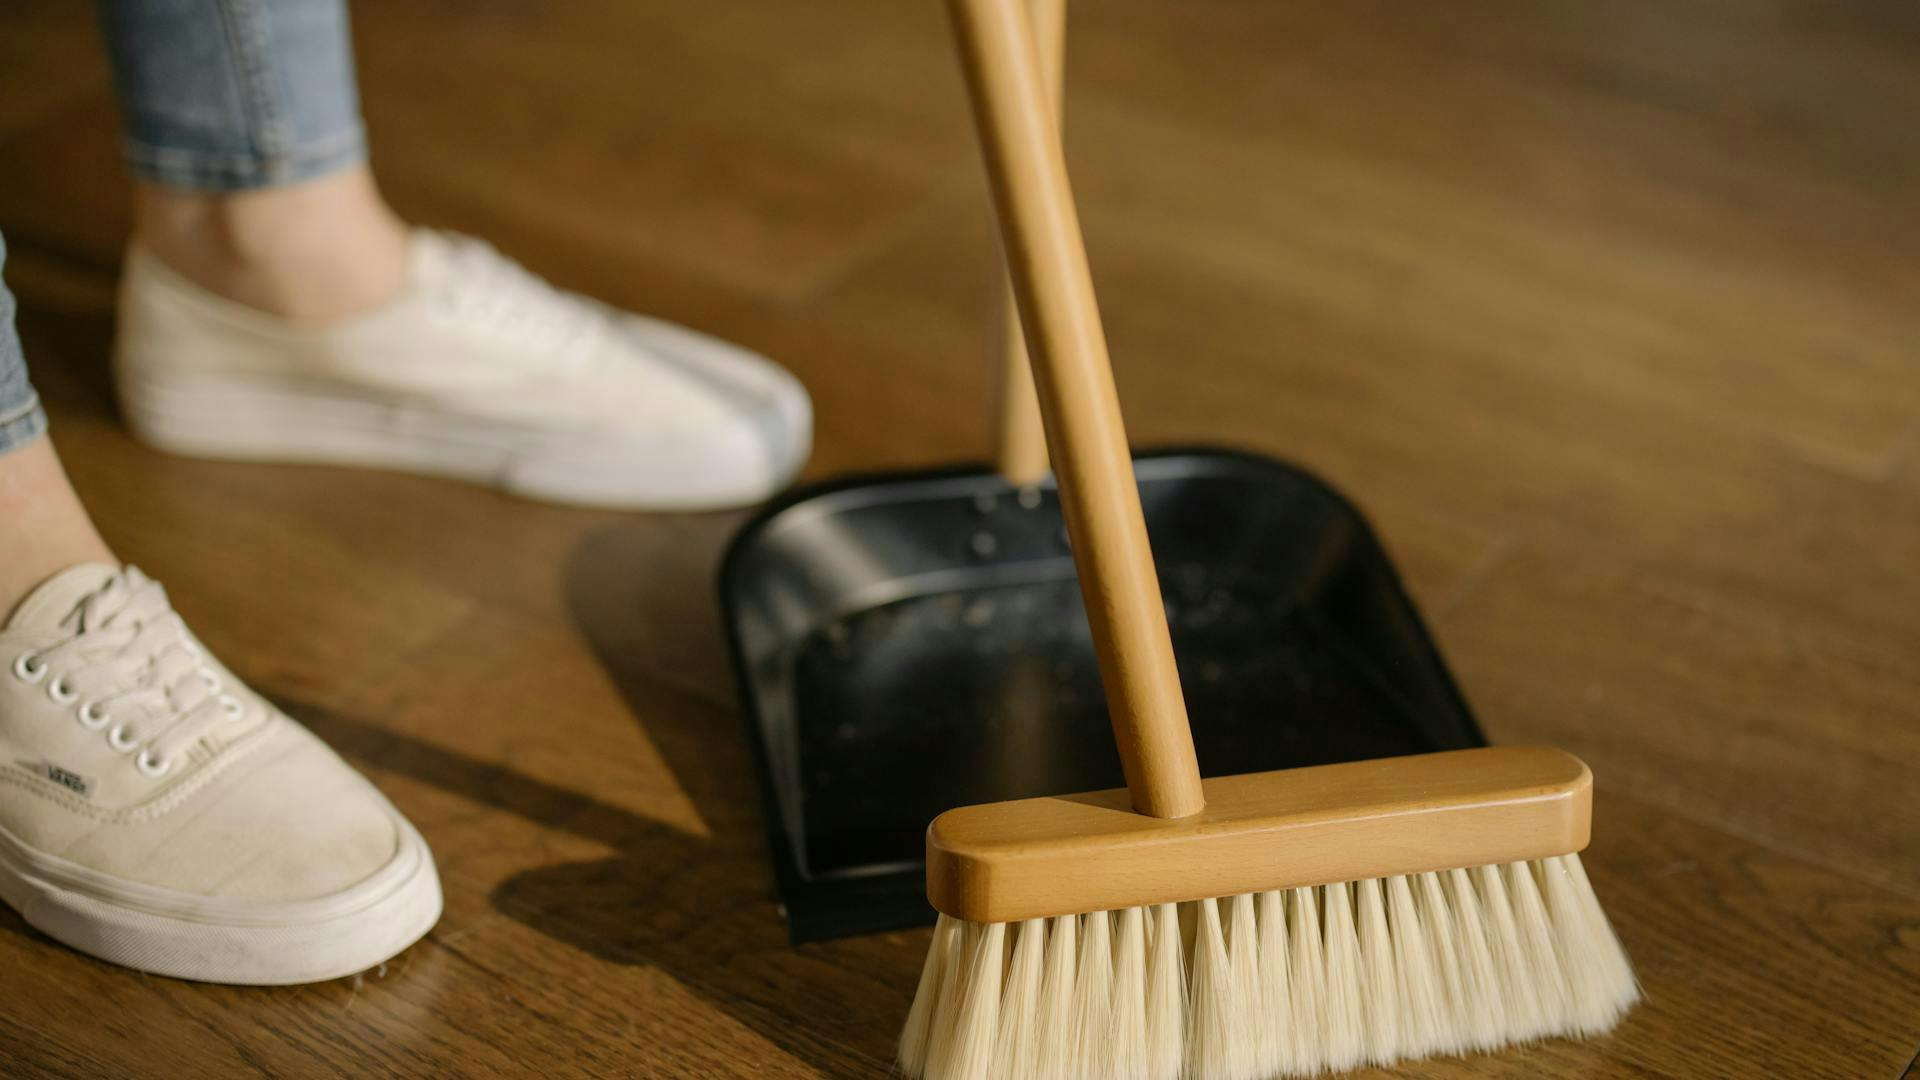 Airbnb Cleaning Checklist: The Road To A Spotless Airbnb Property